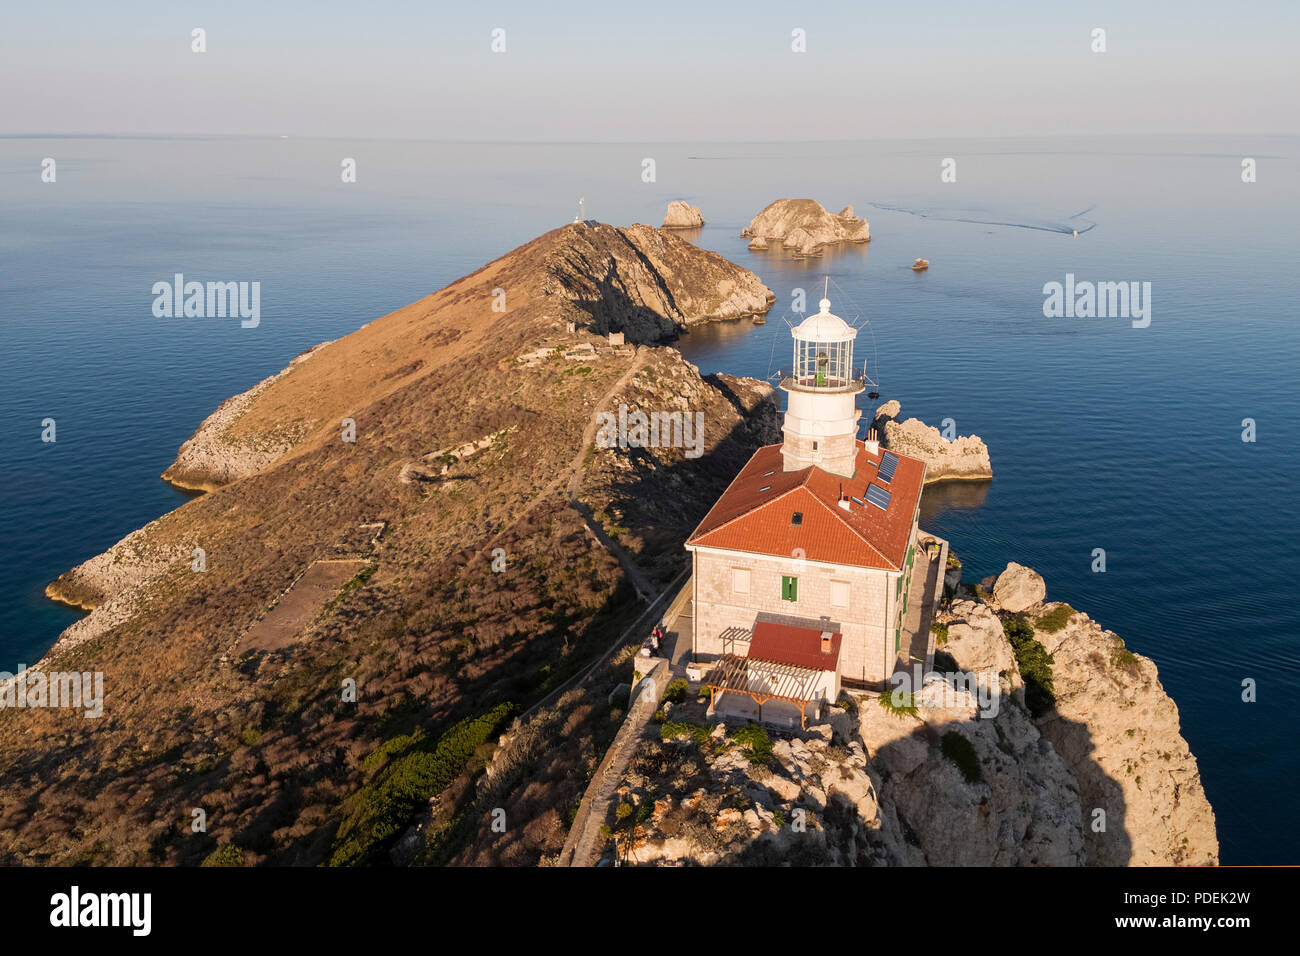 A lighthouse on the remote island of Palagruža in the Croatian Adriatic Stock Photo